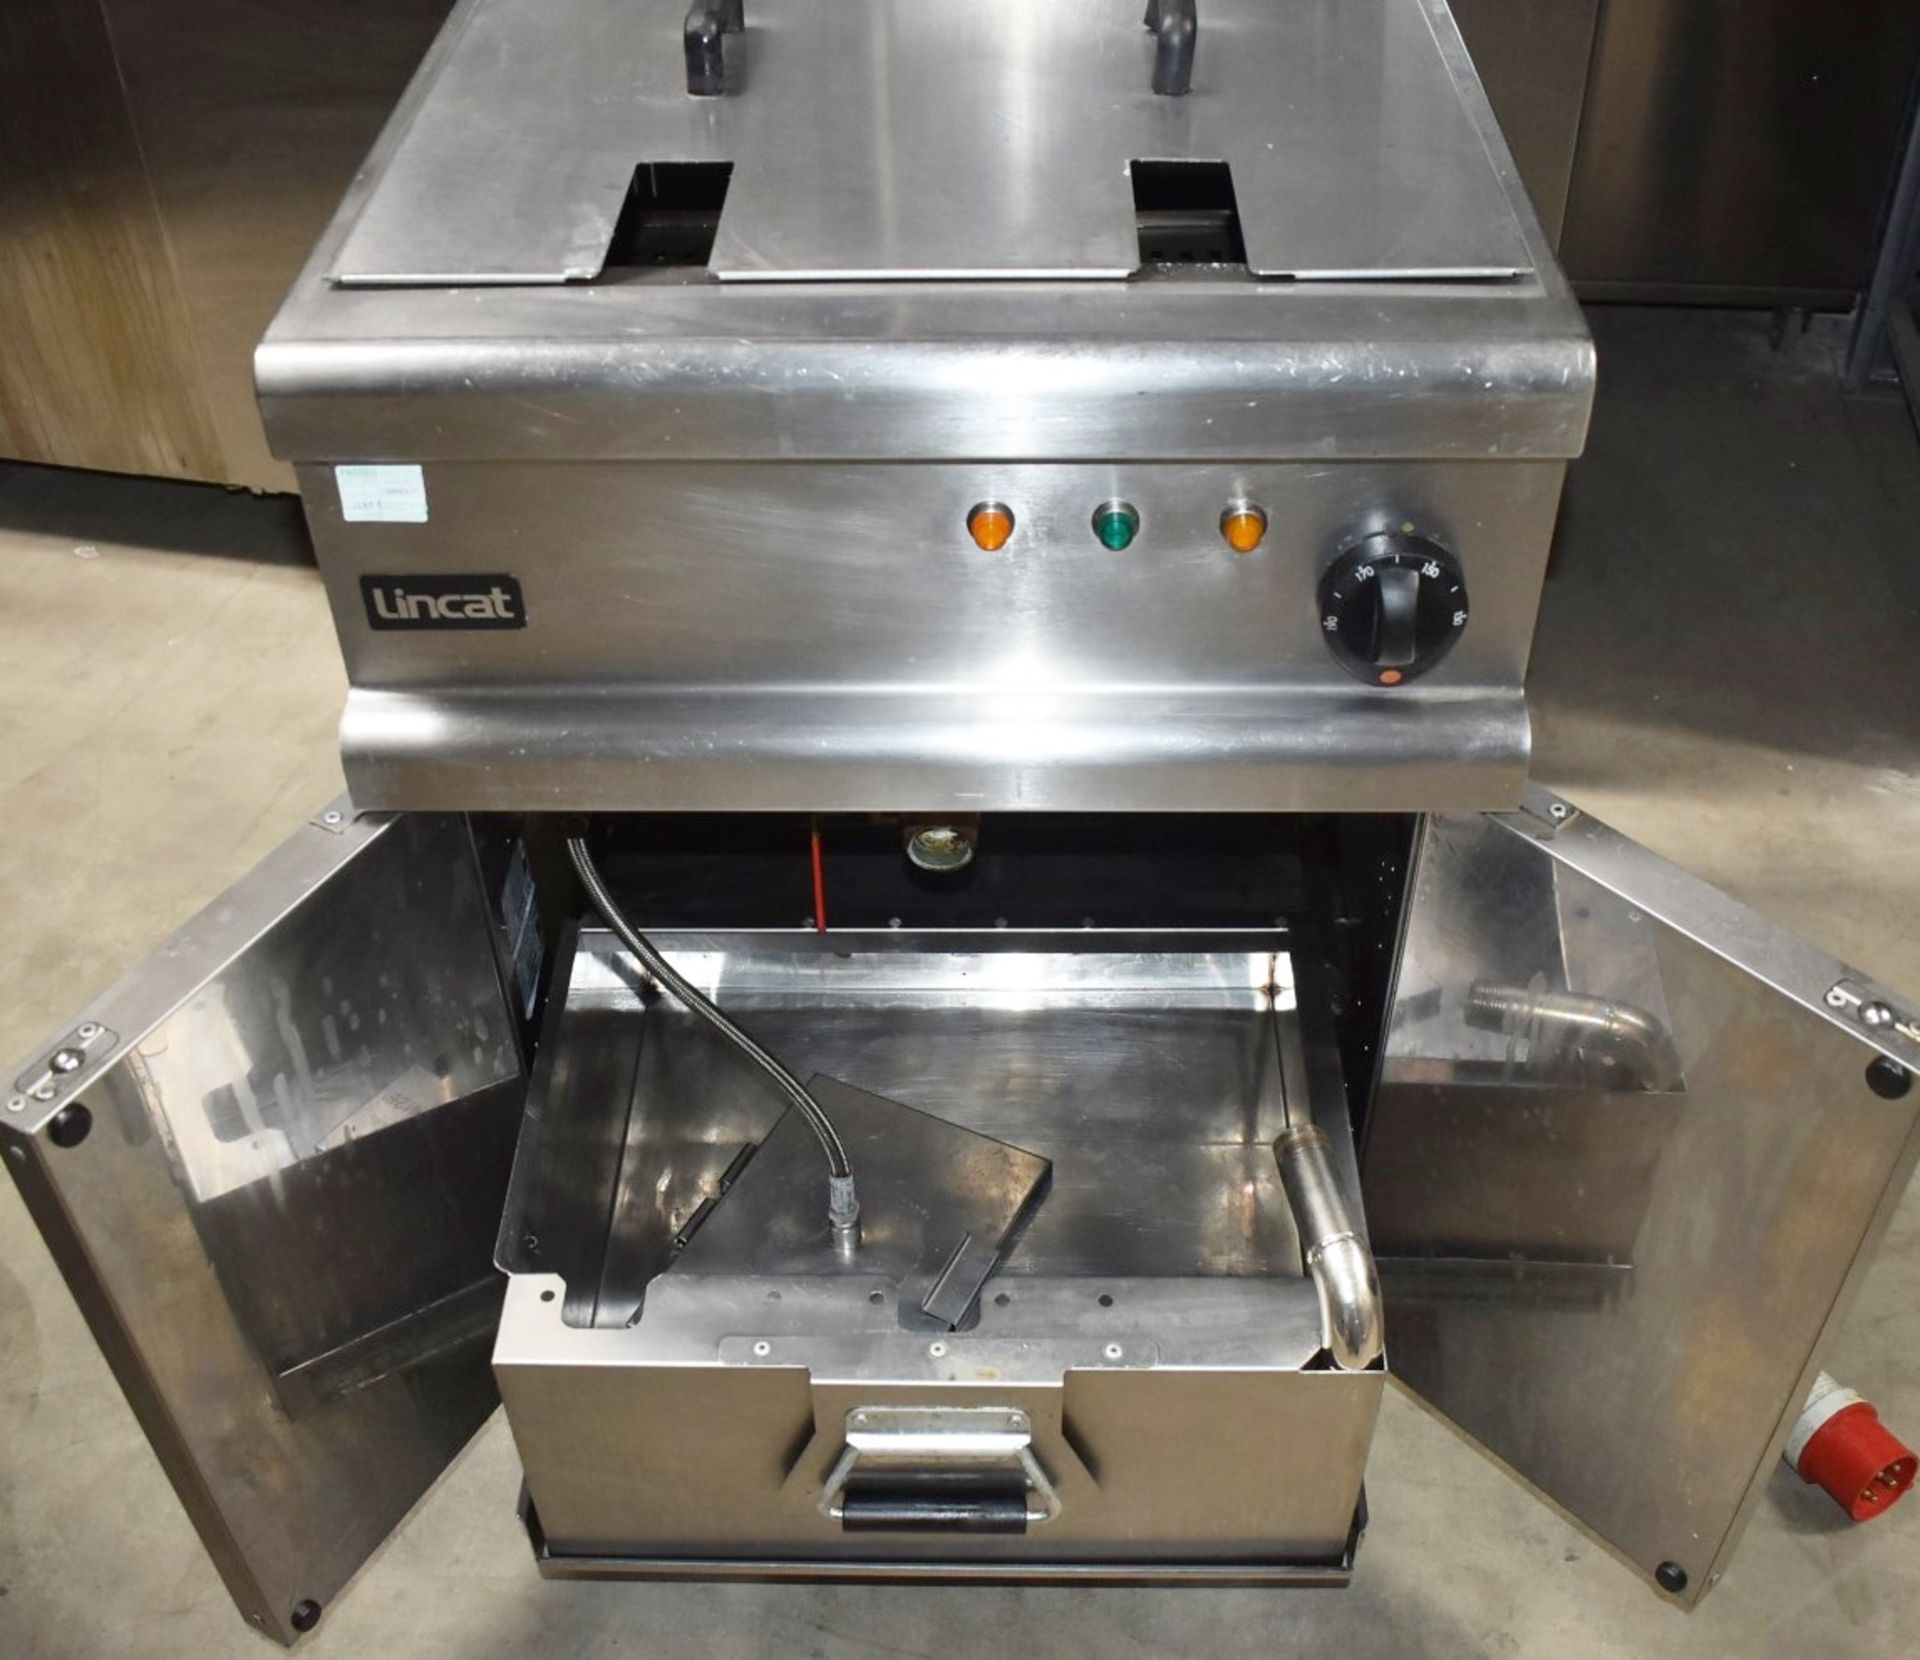 1 x Lincat Opus 700 Single Tank Electric Fryer With Built In Filtration - 3 Phase - Approx RRP £3, - Image 11 of 19